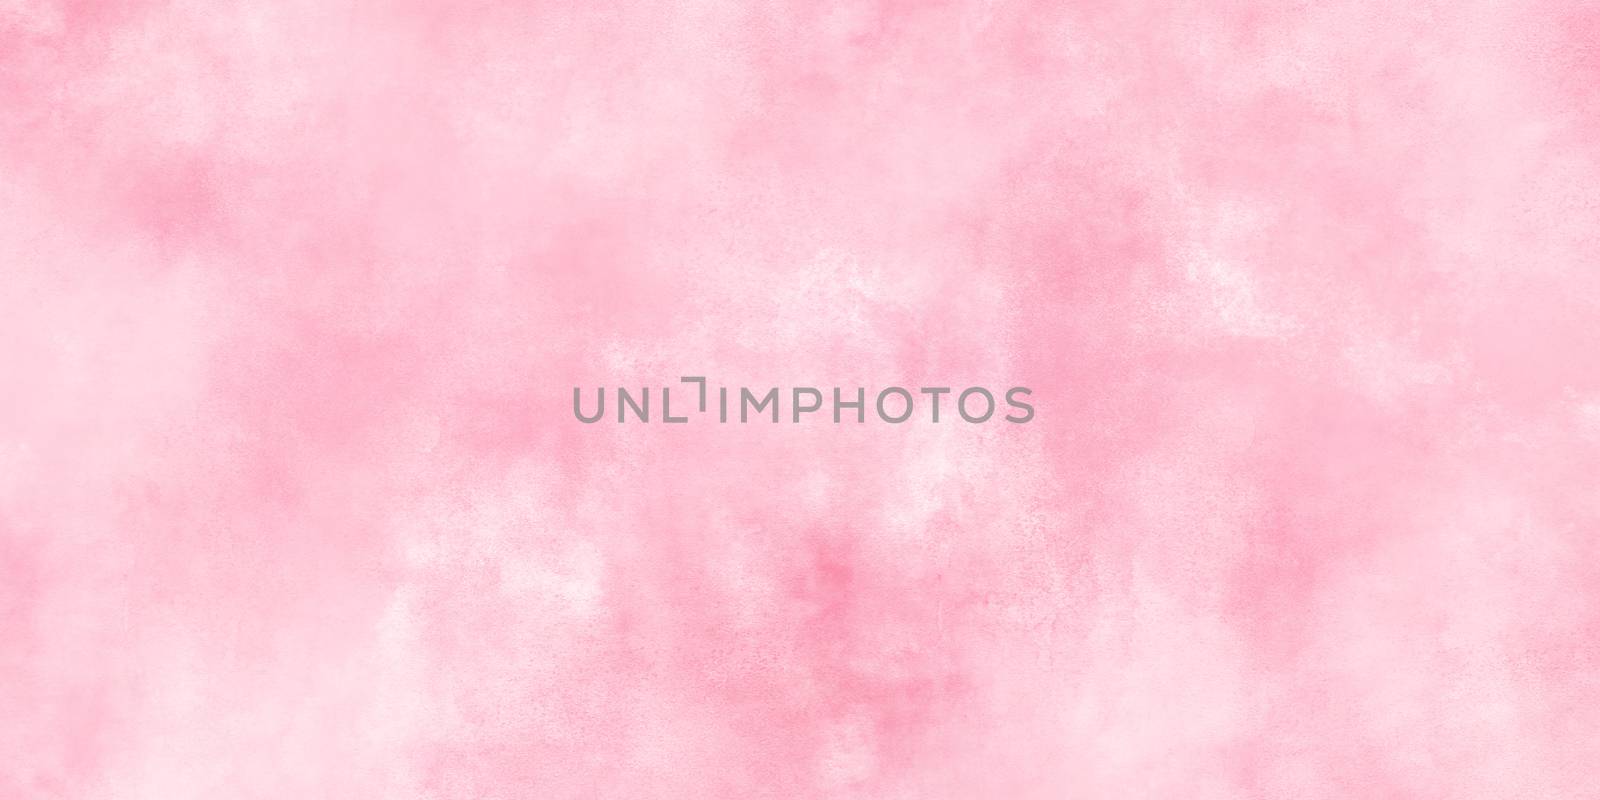 Soft Pink grunge watercolor texture background. For design backd by anlomaja